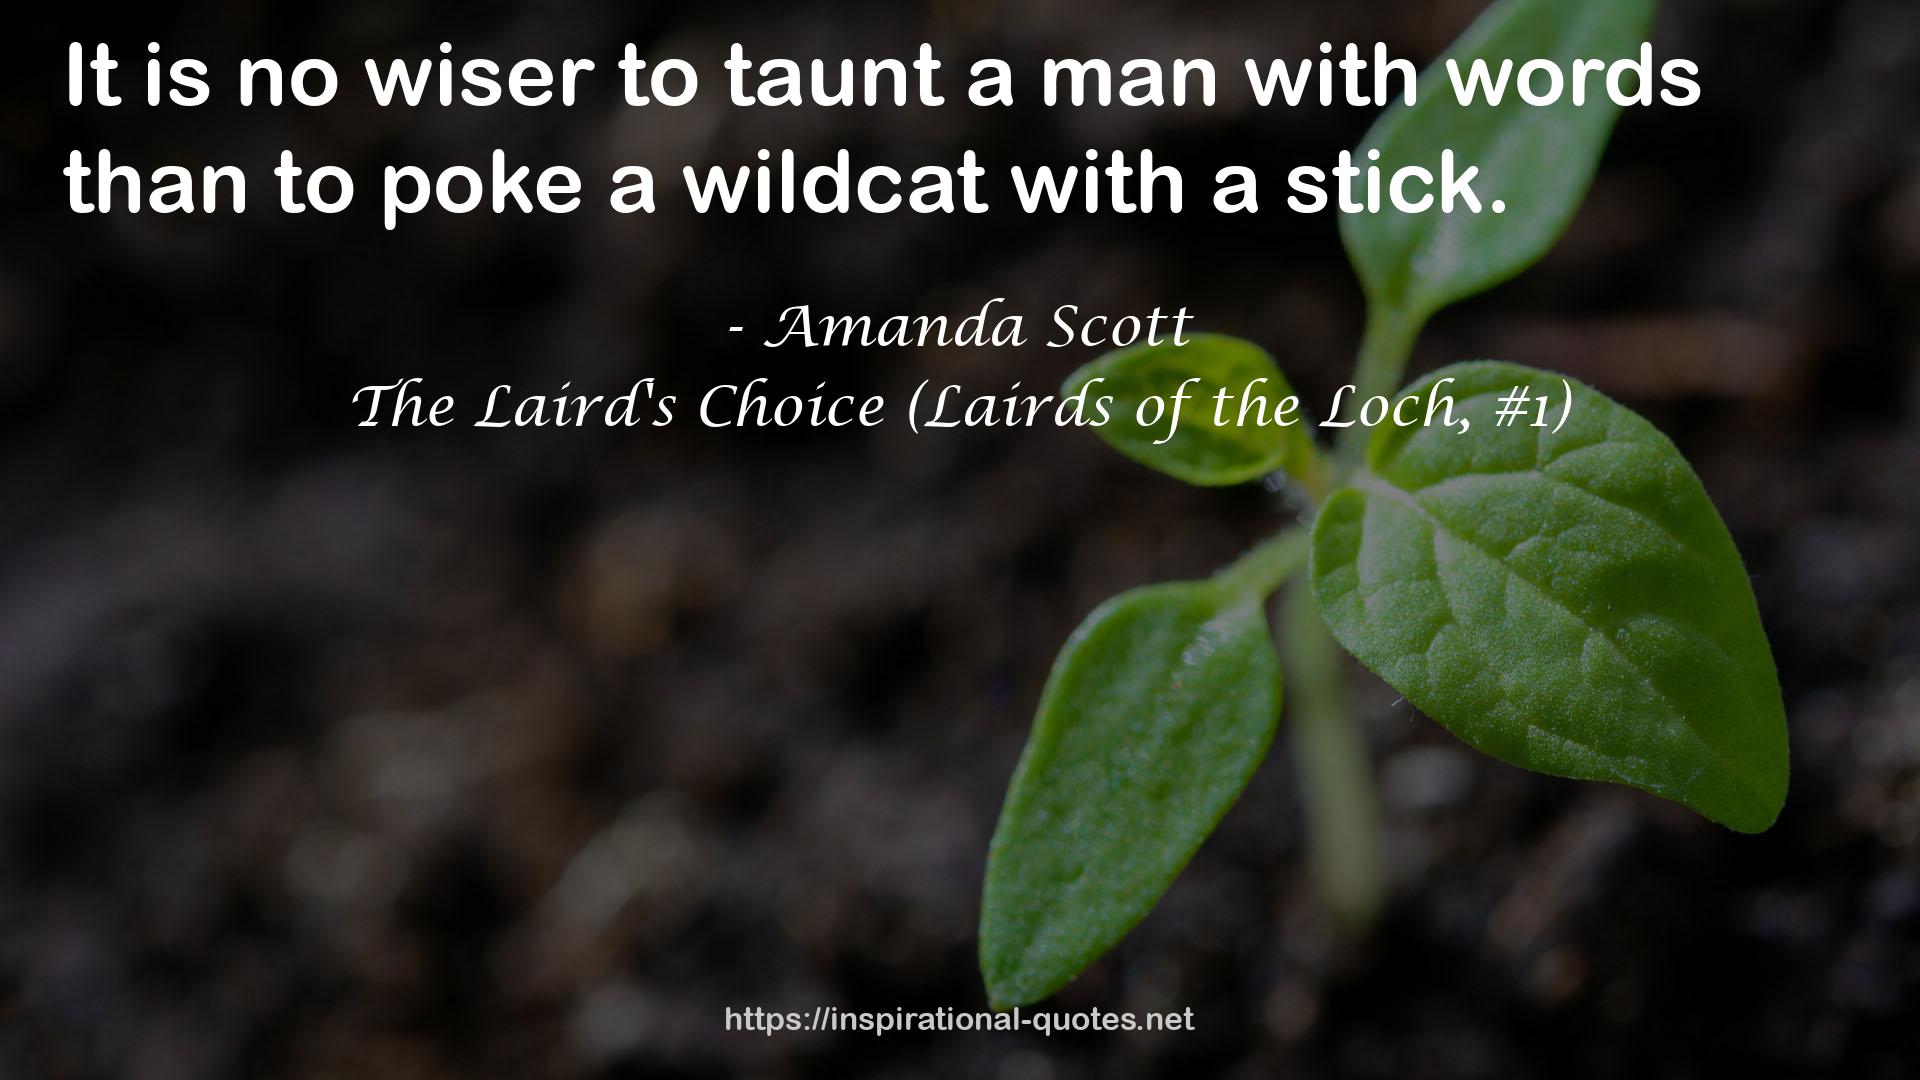 The Laird's Choice (Lairds of the Loch, #1) QUOTES